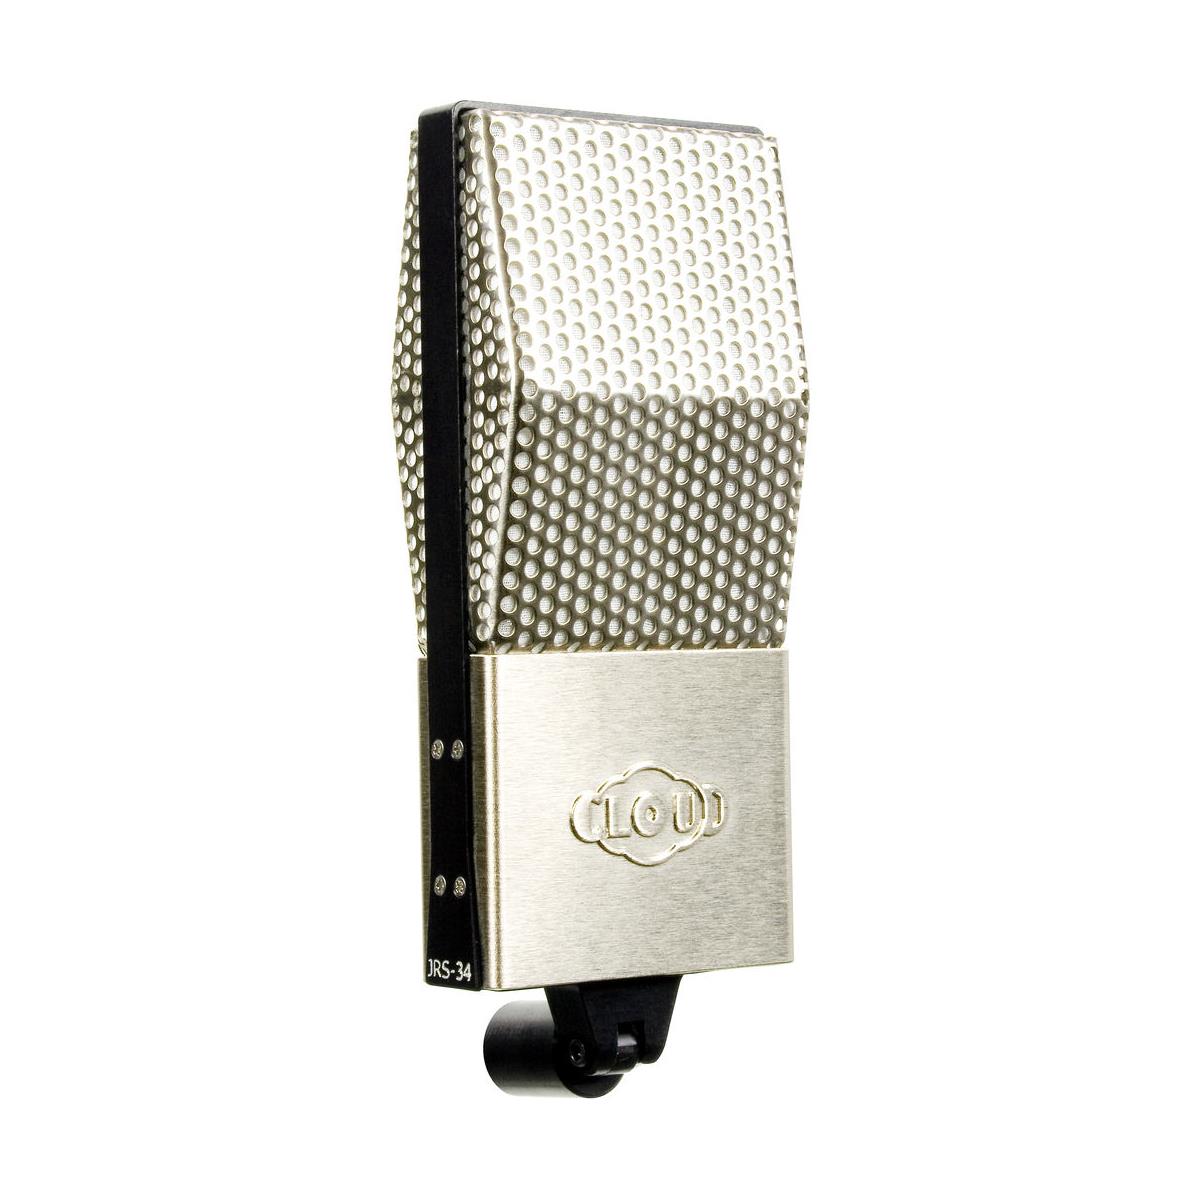 Image of Cloud Microphones JRS-34-A Active Ribbon Microphone